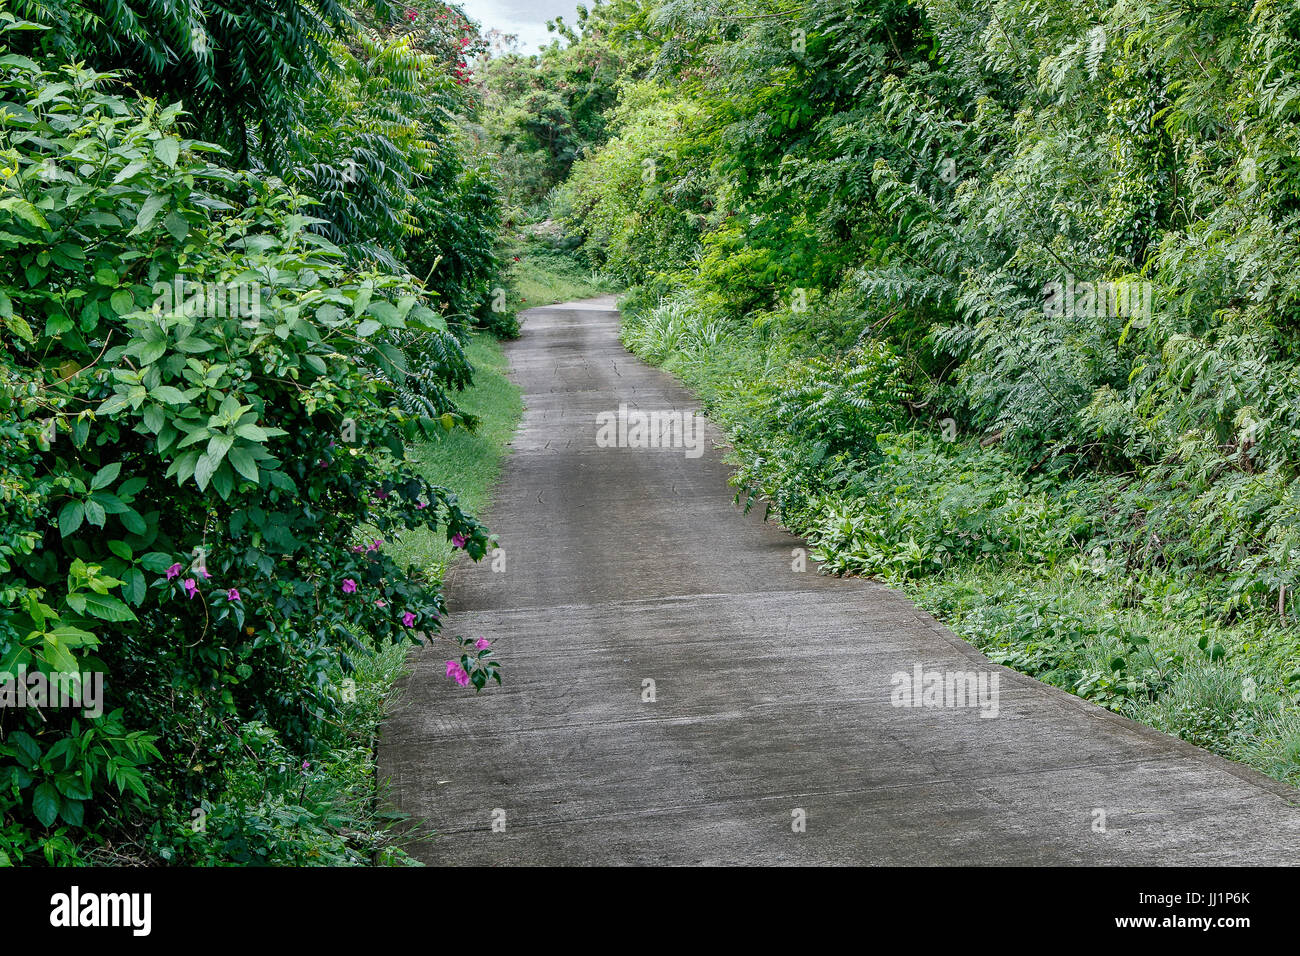 Paved path through a tropical forest. Stock Photo